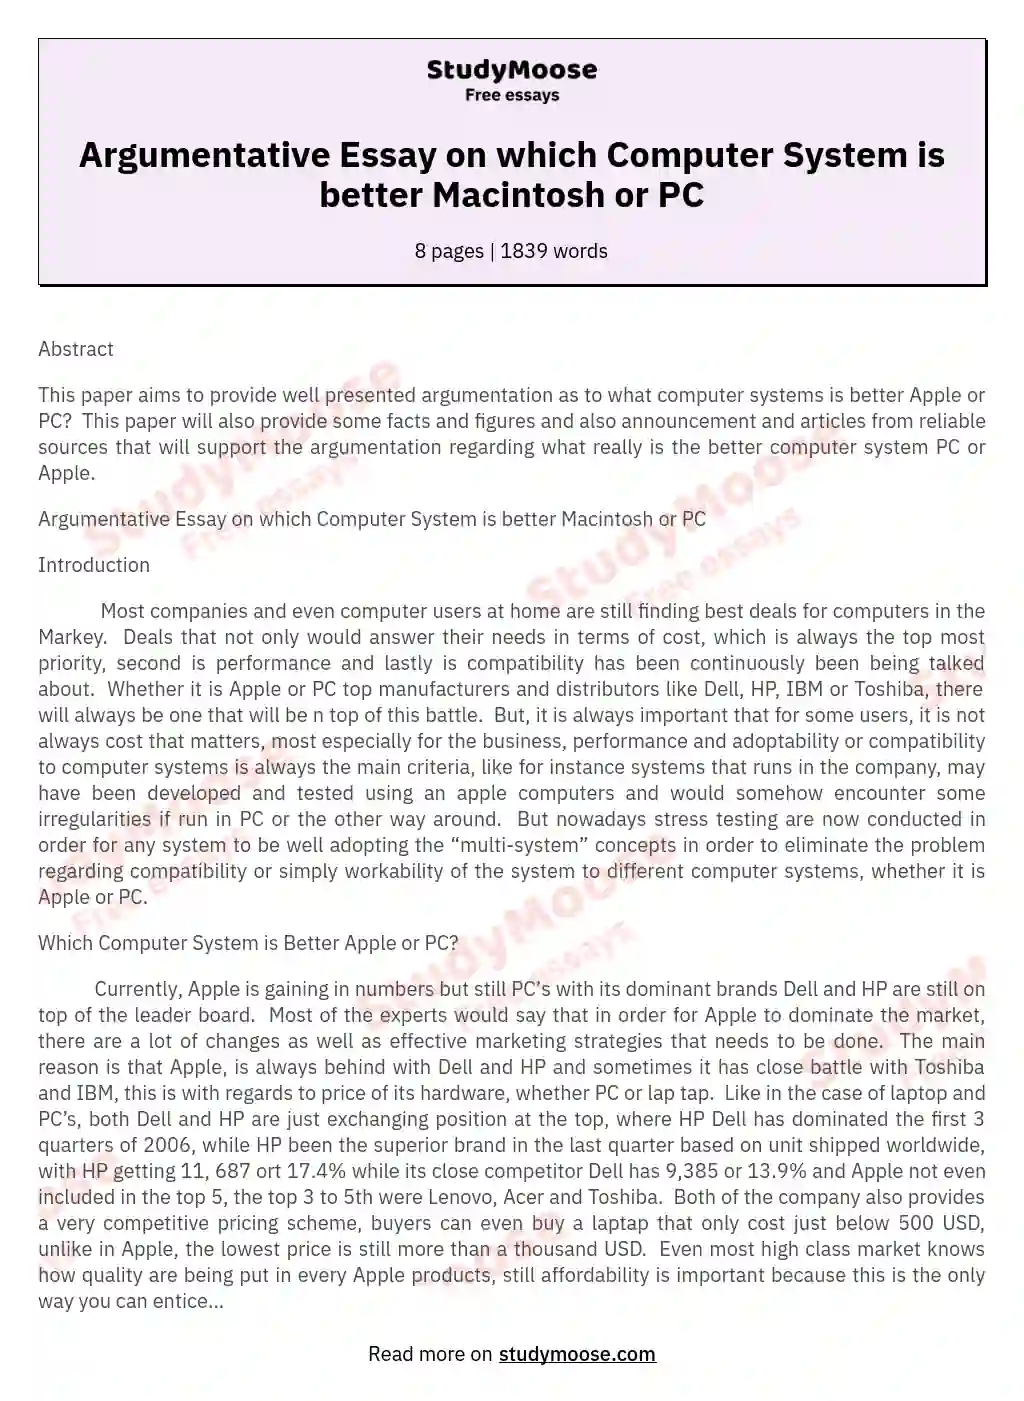 Argumentative Essay on which Computer System is better Macintosh or PC essay